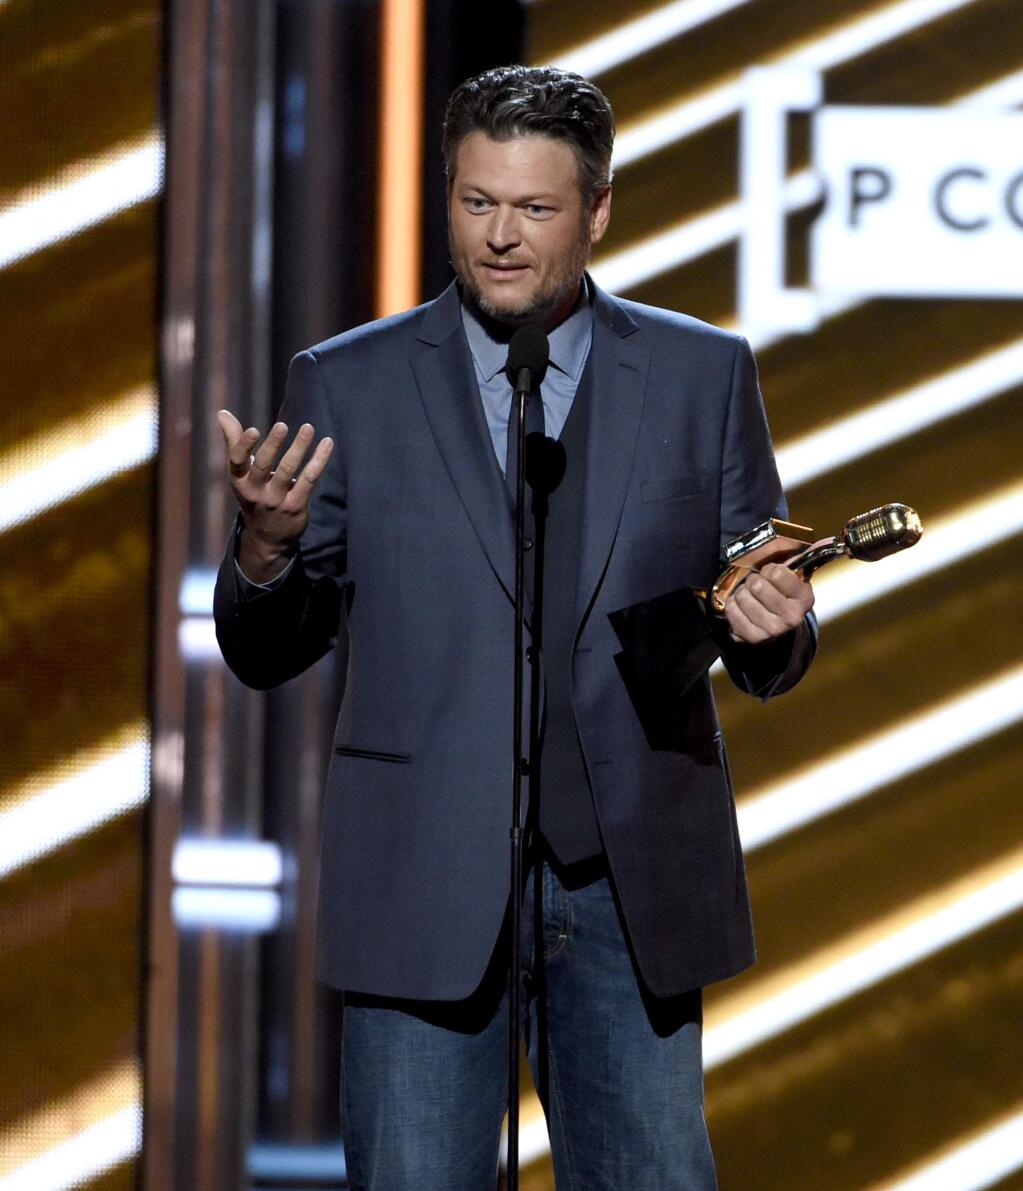 Blake Shelton accepts the award for top country artist at the Billboard Music Awards at the T-Mobile Arena on Sunday, May 21, 2017, in Las Vegas. (Photo by Chris Pizzello/Invision/AP)